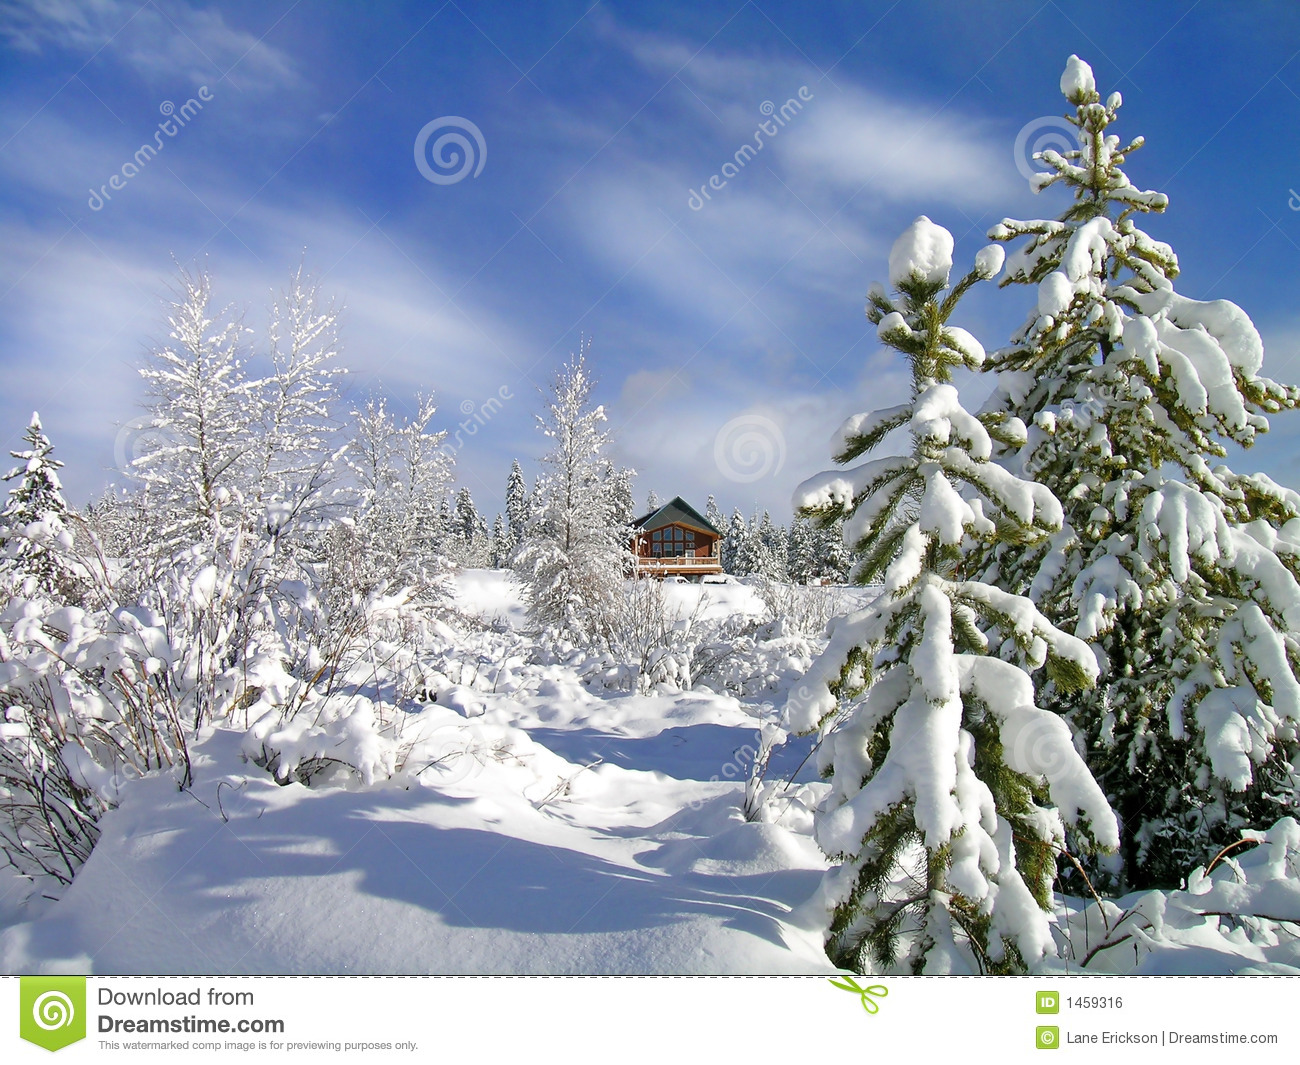 Cabin In Stand Of Pine Trees Covered In Snow In The Winter